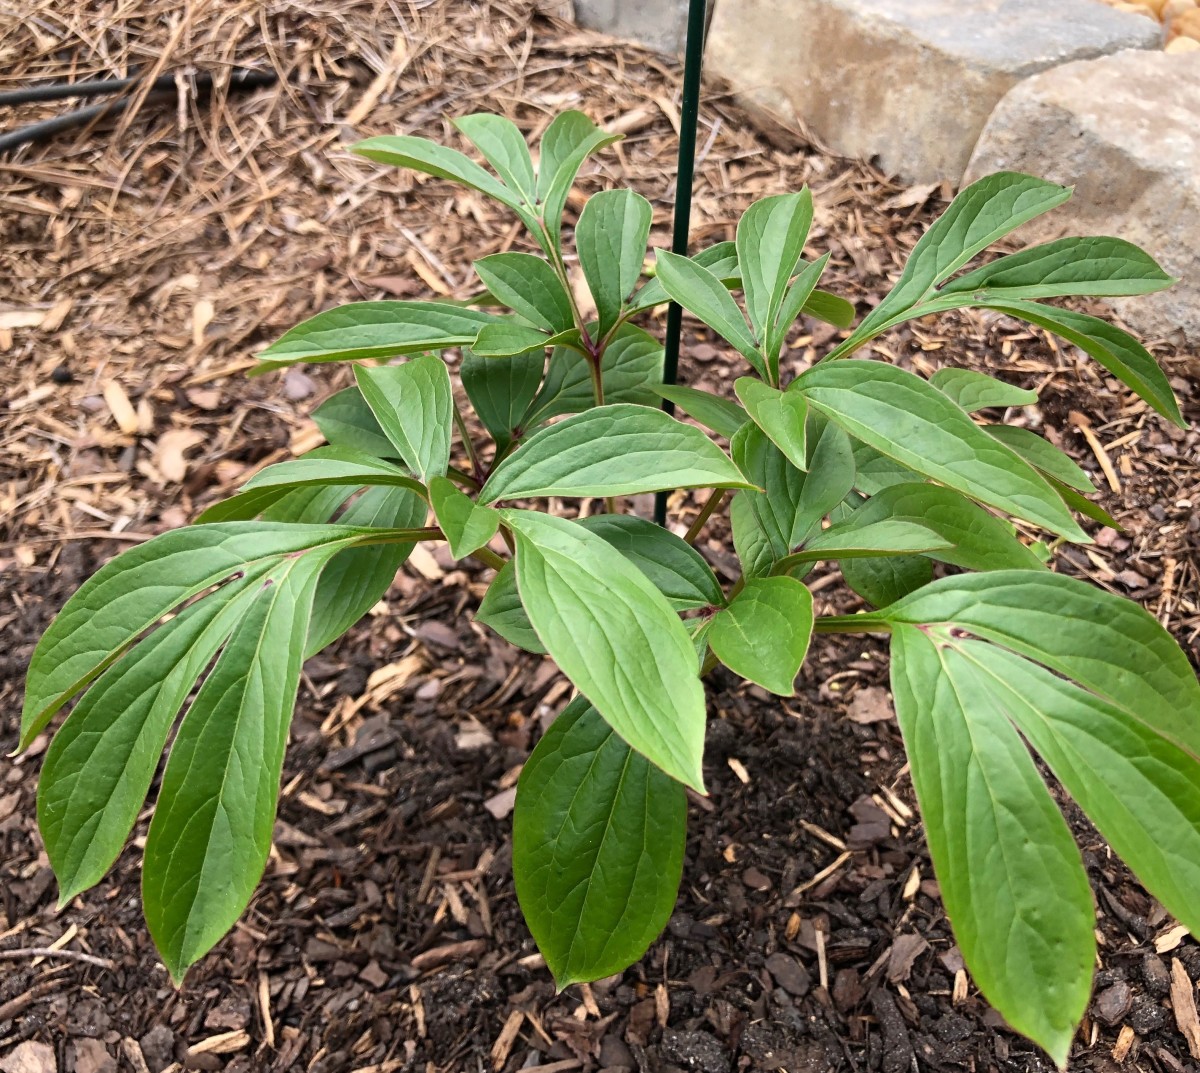 This peony just emerged from the ground about a week ago. This photo was taken May 4, 2021. Soon it will have huge buds the produce those gorgeous flowers.